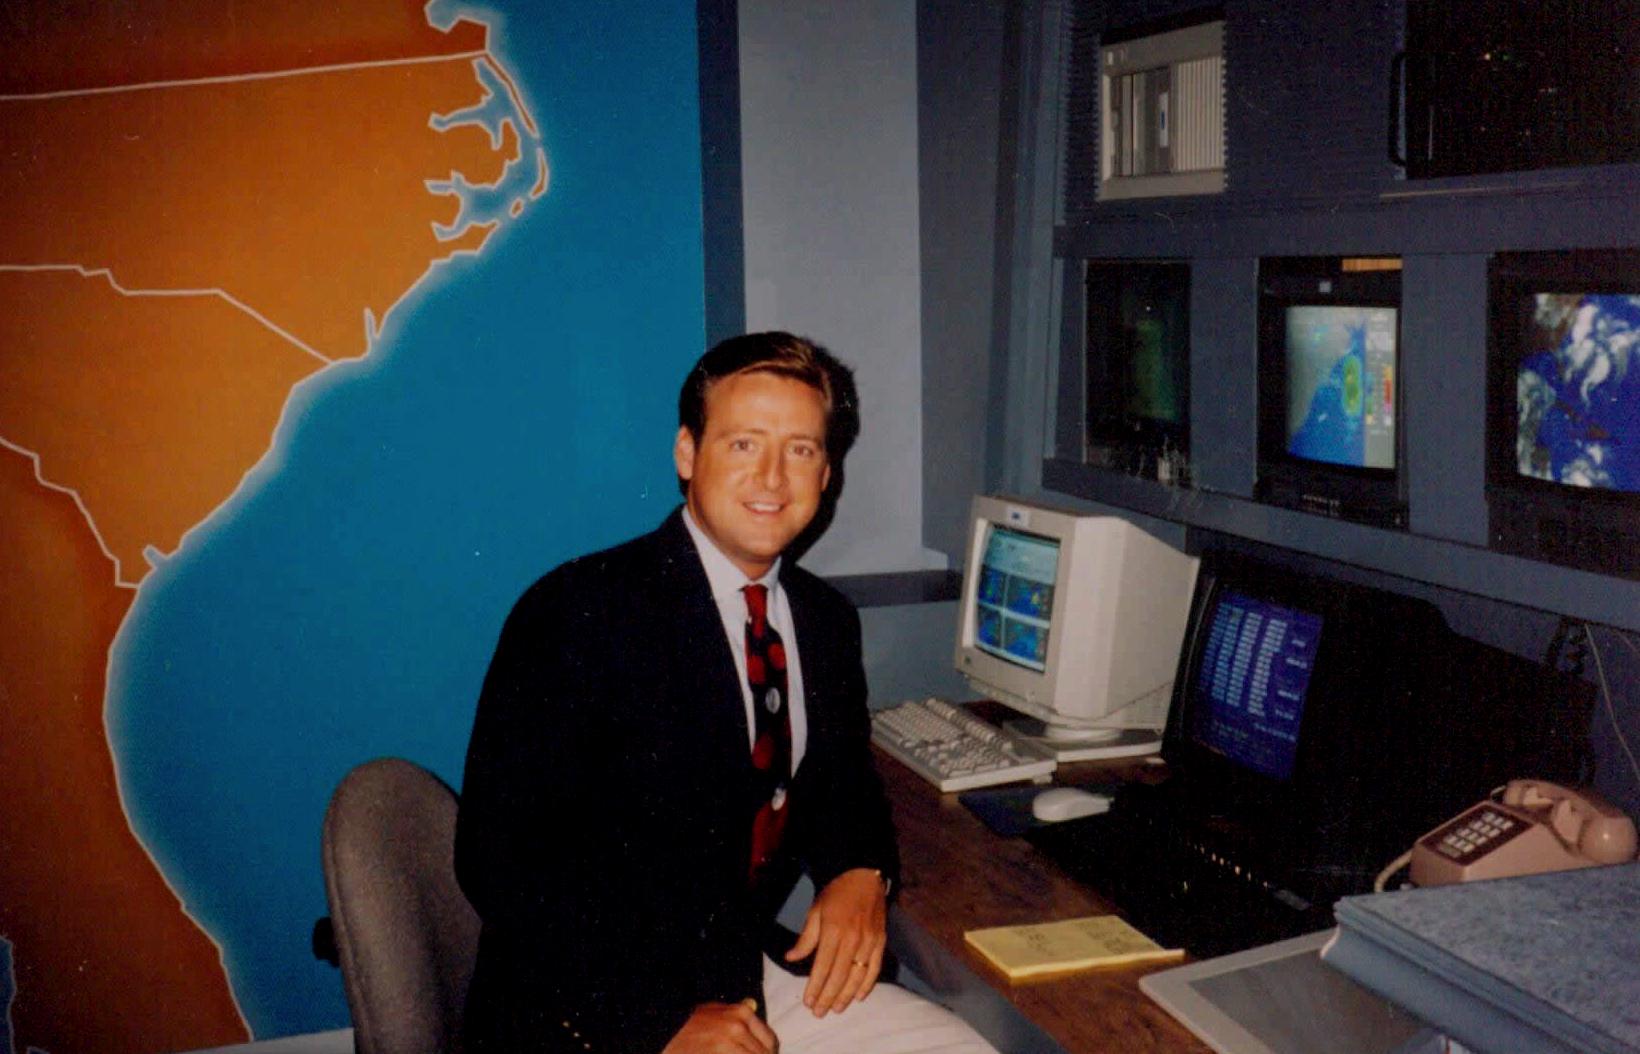 PATT NODAY: on-set preparing for a live newscast as a popular TV Weatherman throughout the 90's for CBS and then ABC Television affiliates.